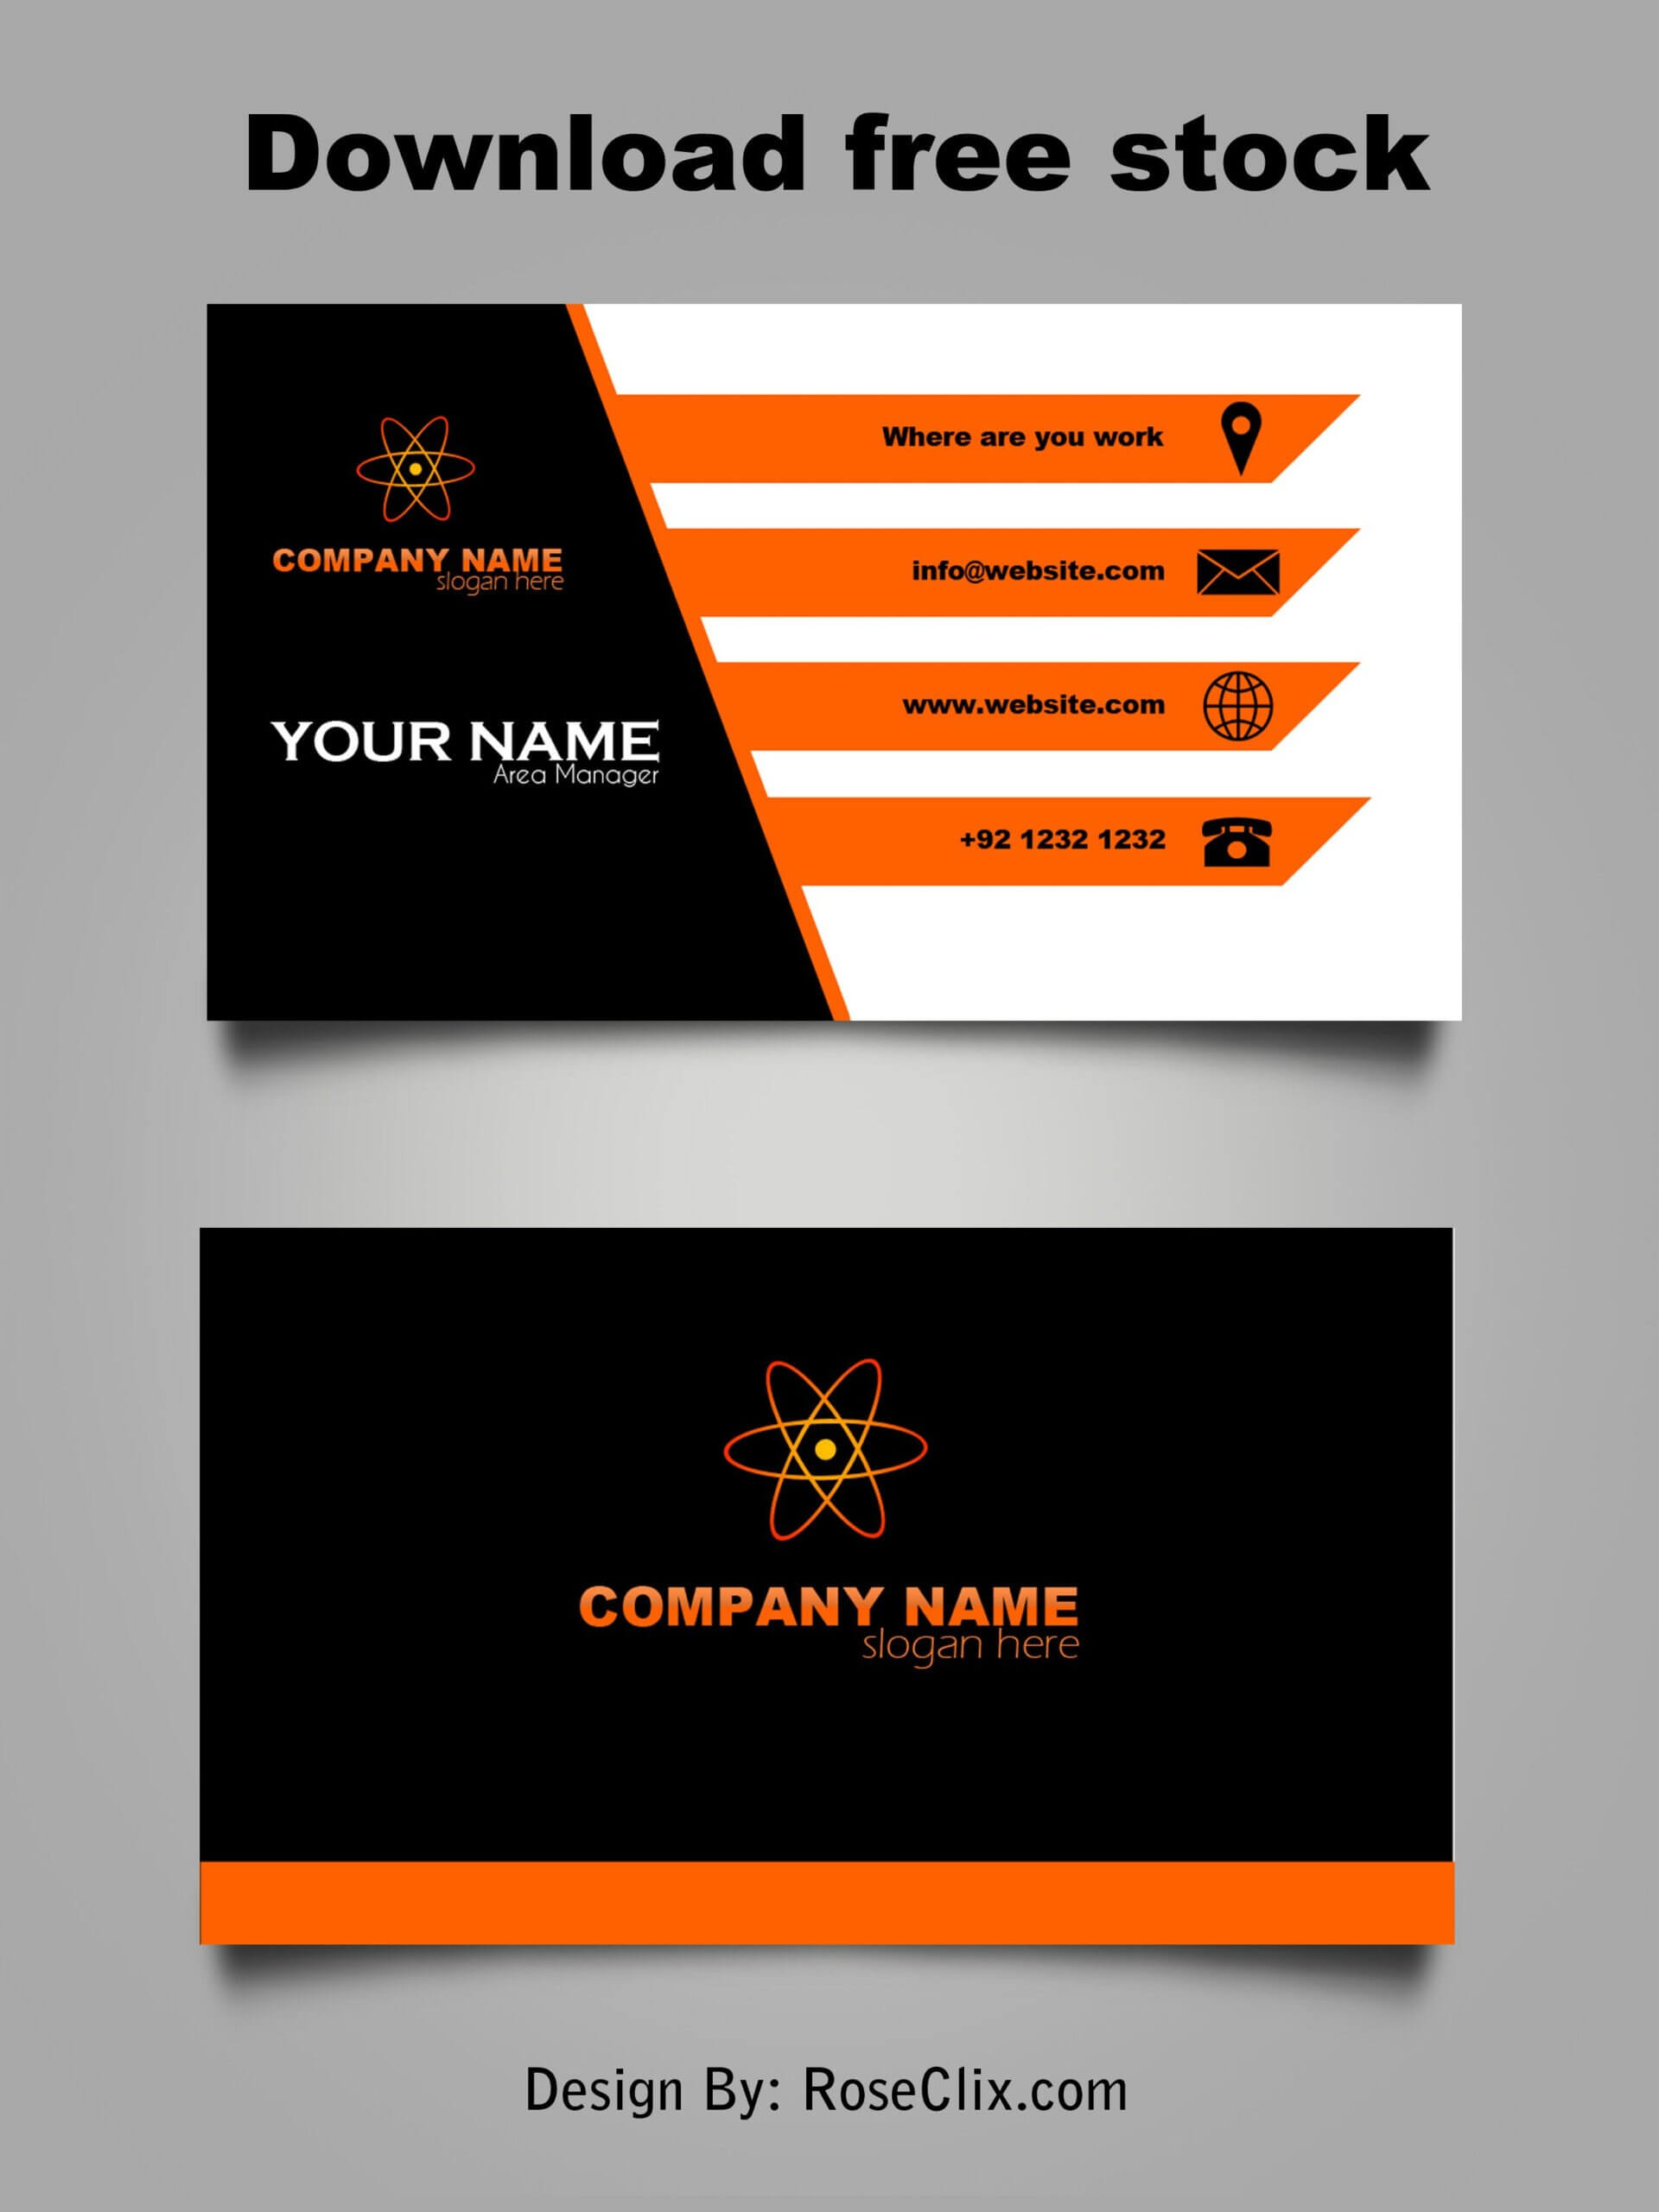 001 Free Downloadable Business Card Template Fantastic Ideas Intended For Word 2013 Business Card Template